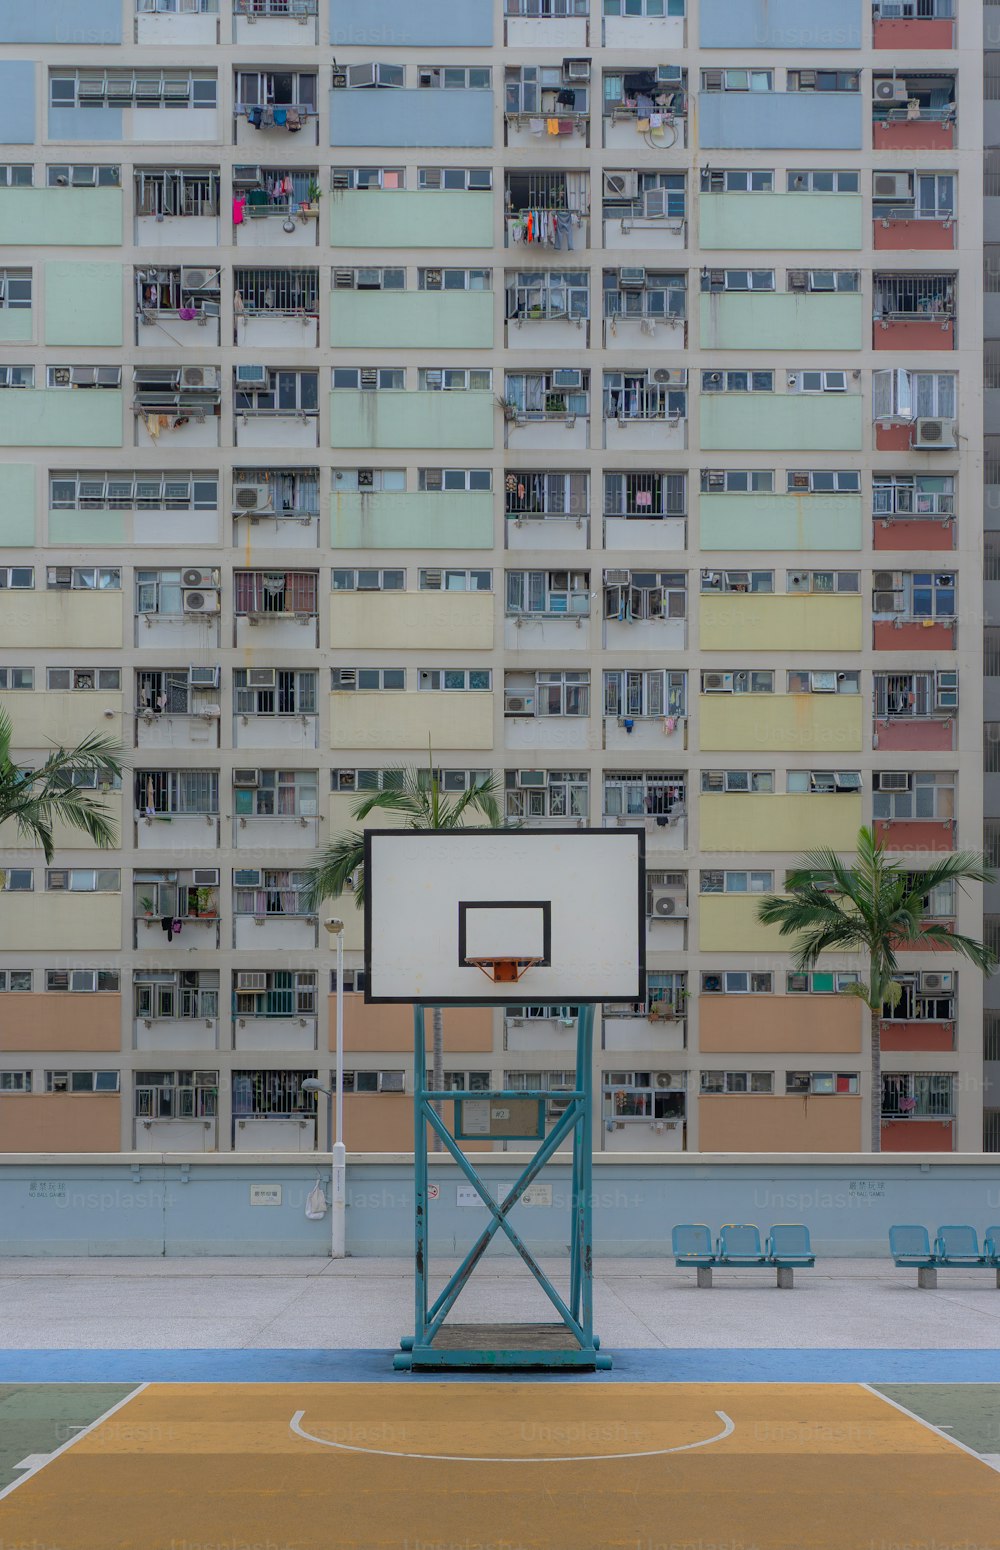 a basketball court in front of a tall building